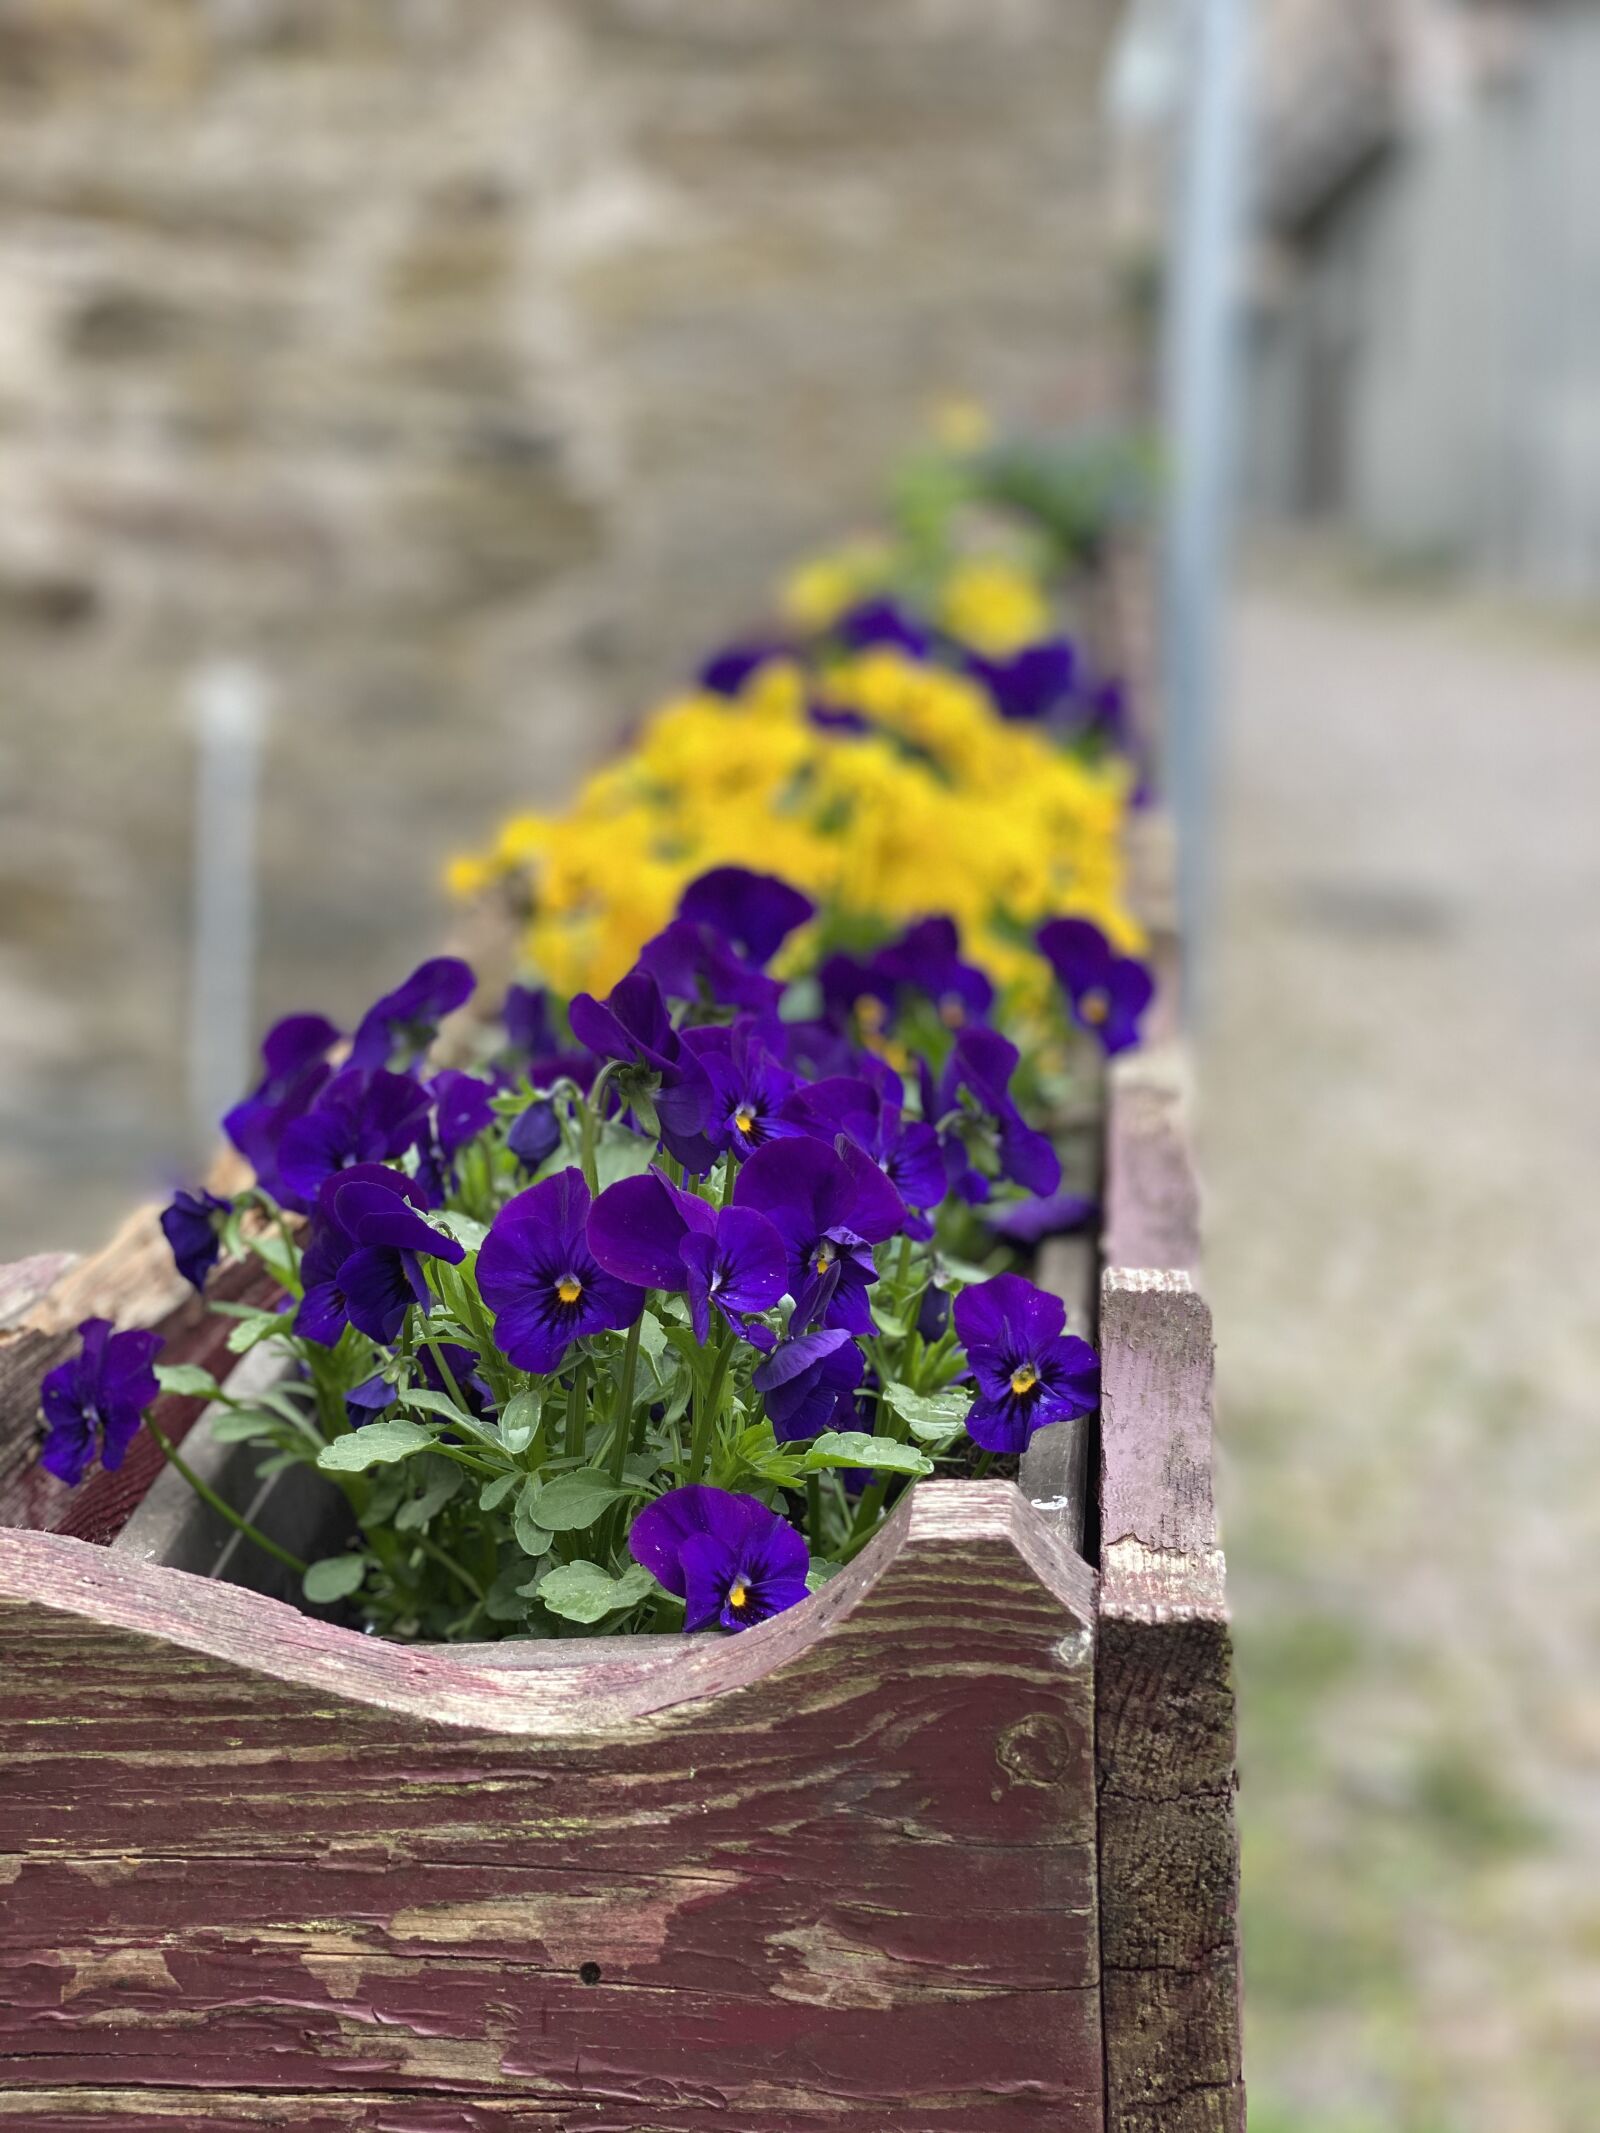 iPhone 11 Pro back dual camera 6mm f/2 sample photo. Purple, violet, spring photography